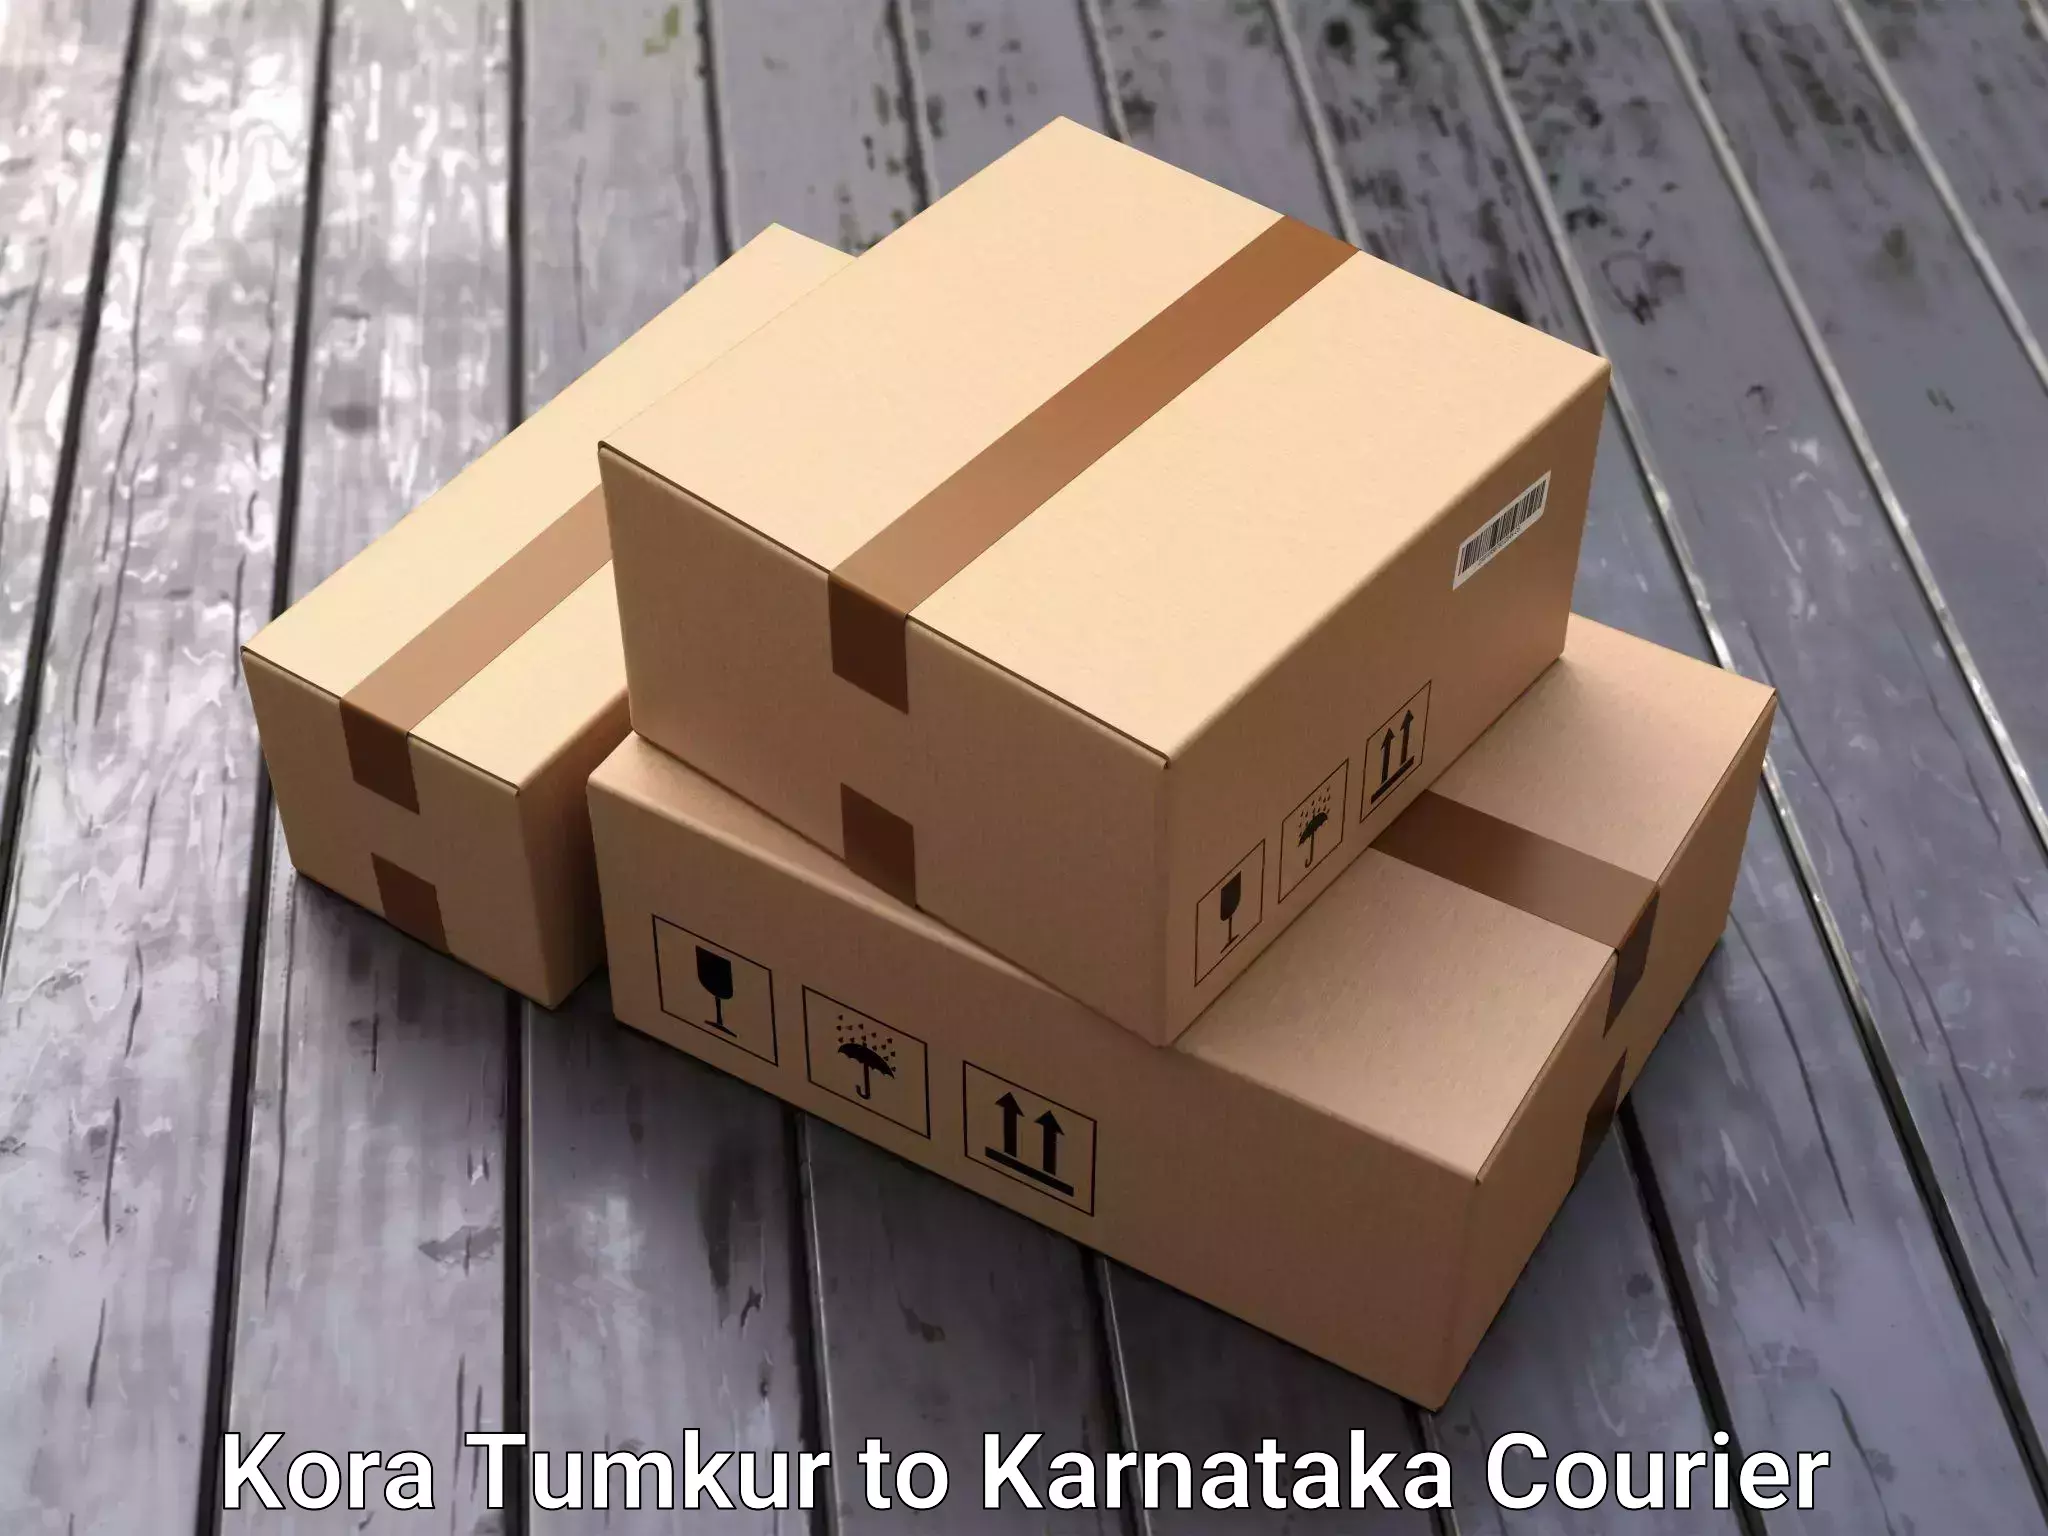 Professional packing and transport in Kora Tumkur to Mangalore Port